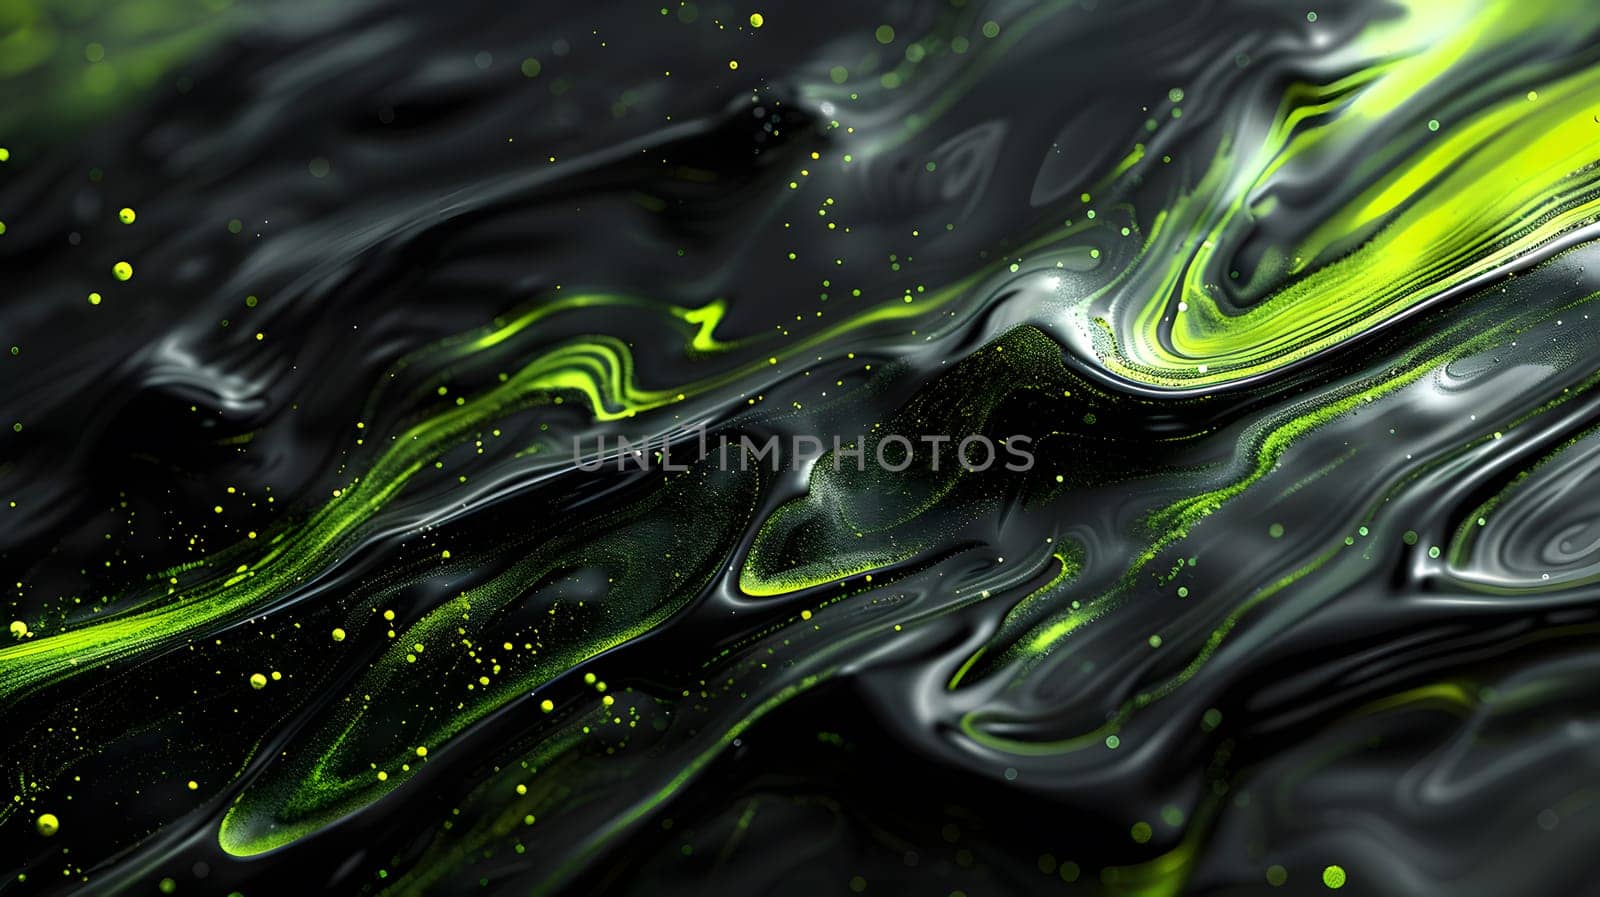 Green swirl on black background inspired by water, grass, and fractal art by Nadtochiy